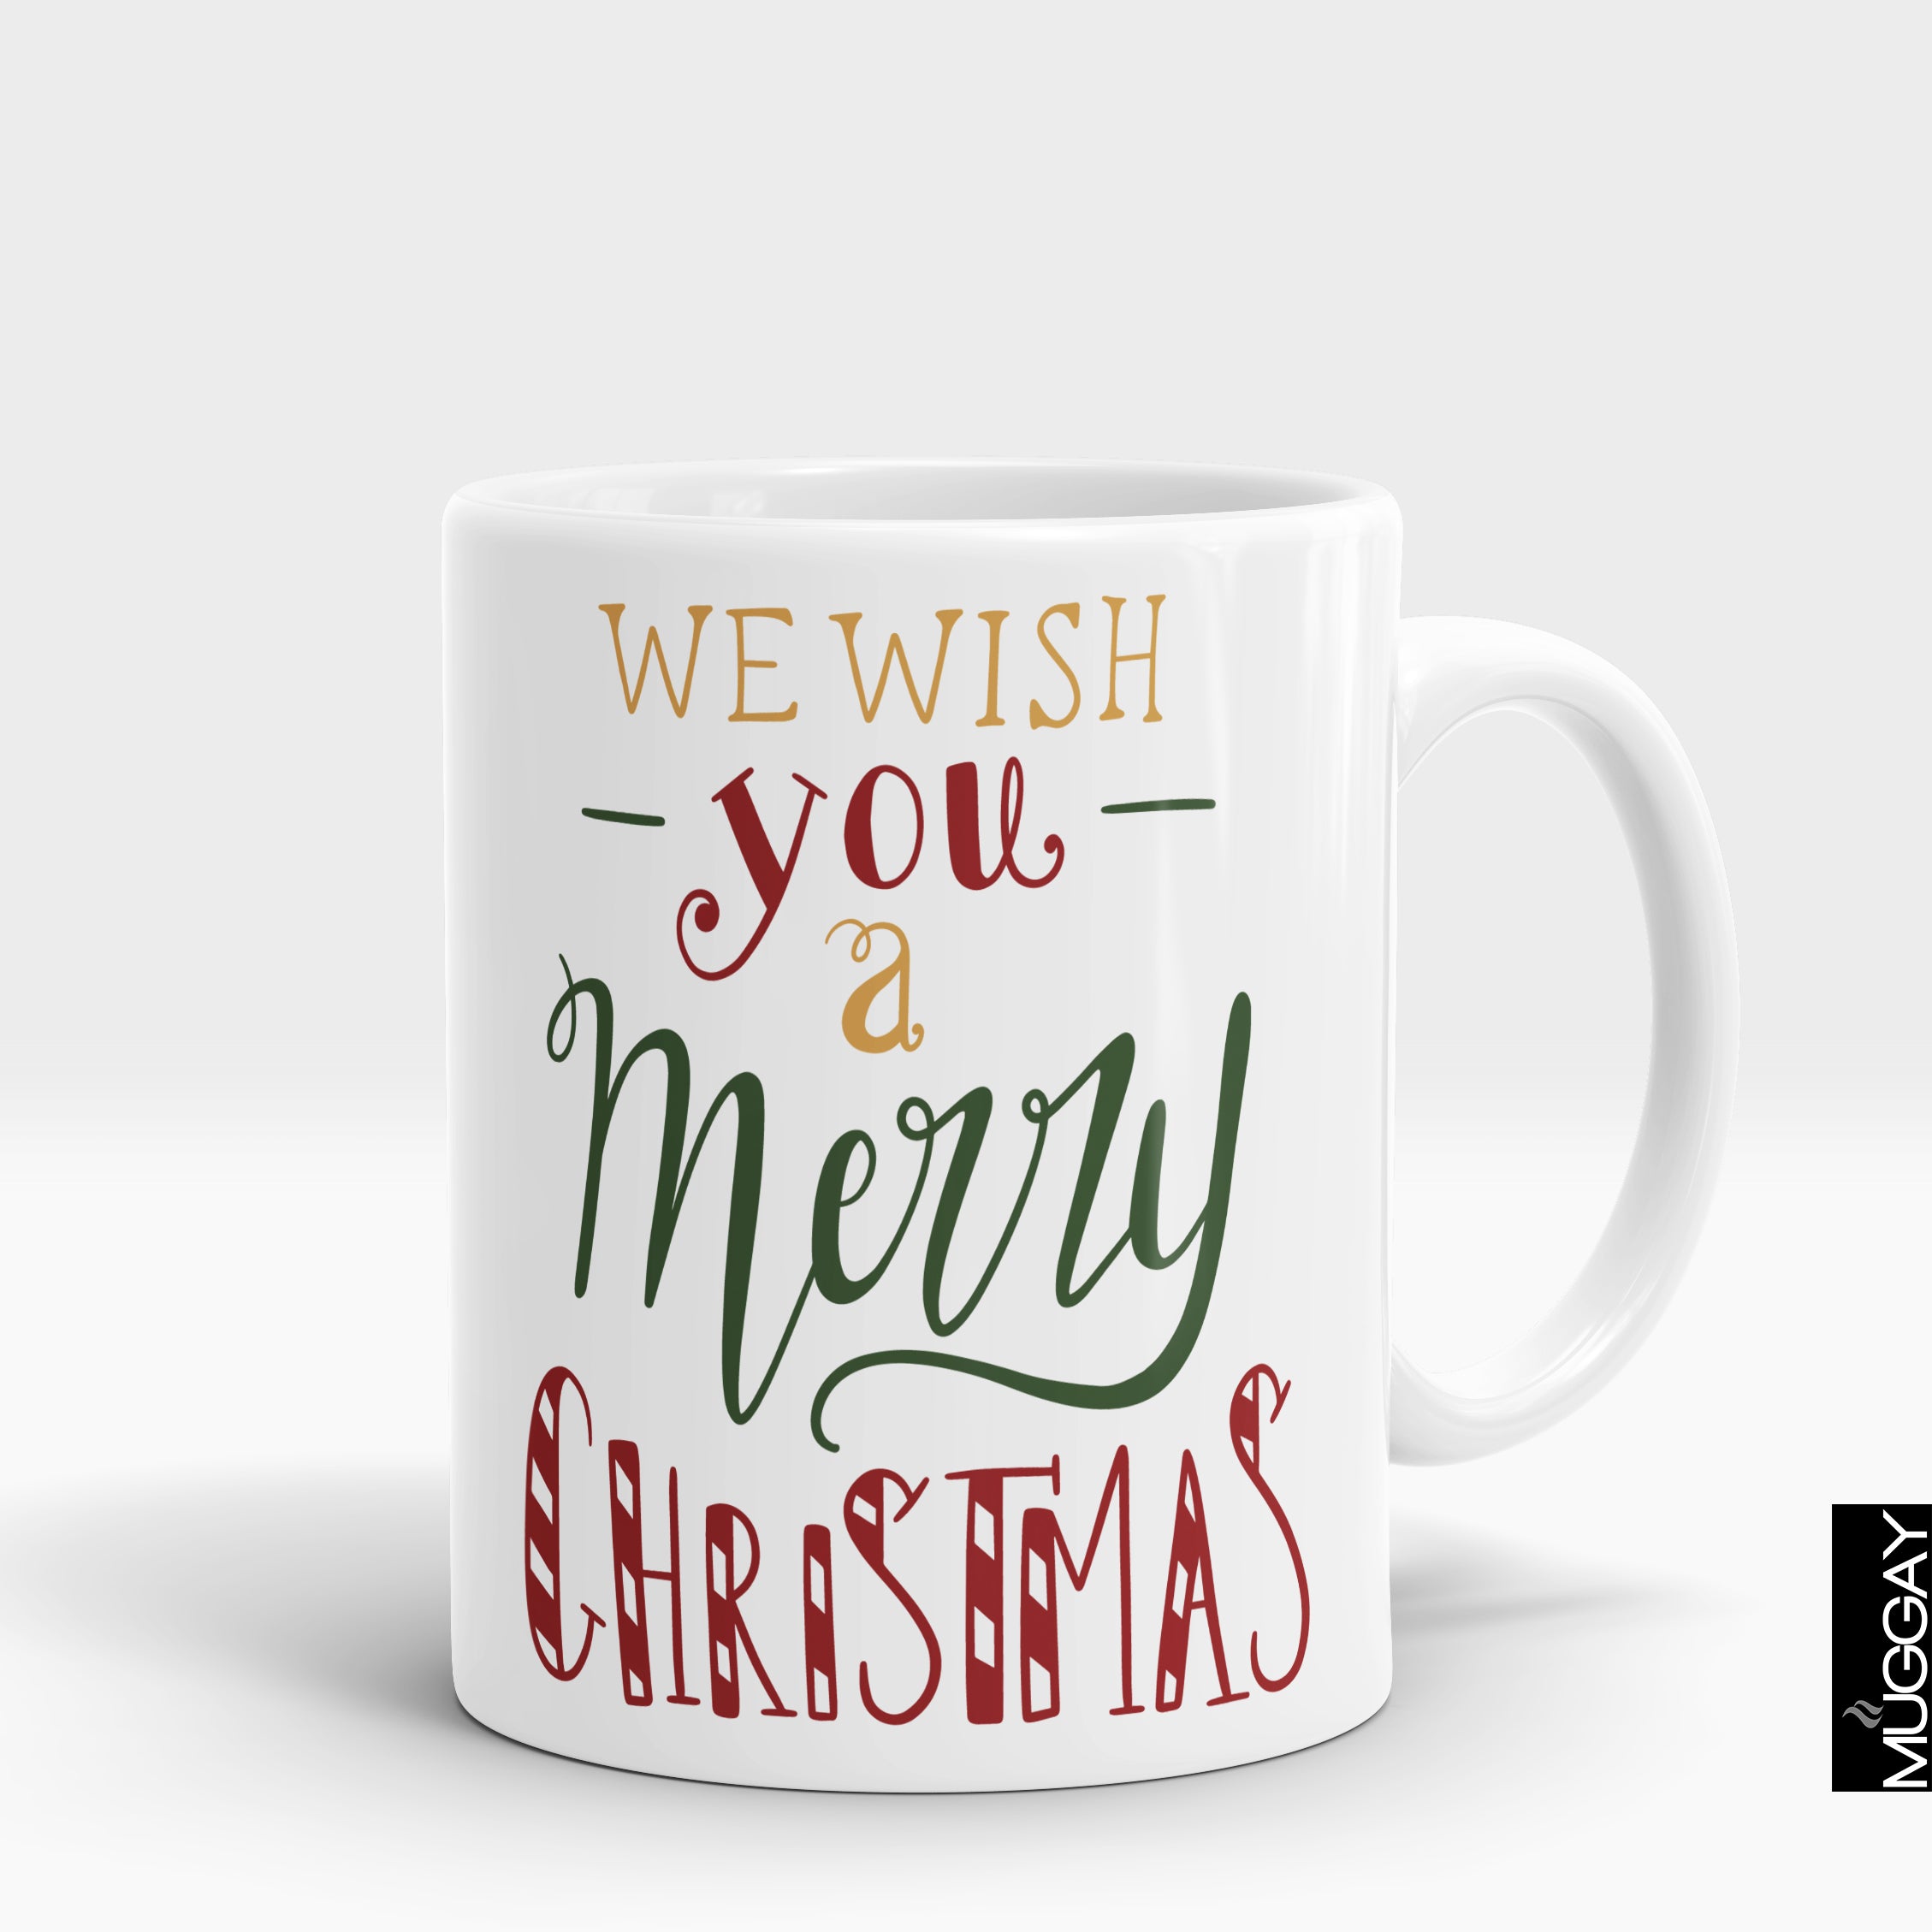 we wish_a_Merry Christmas